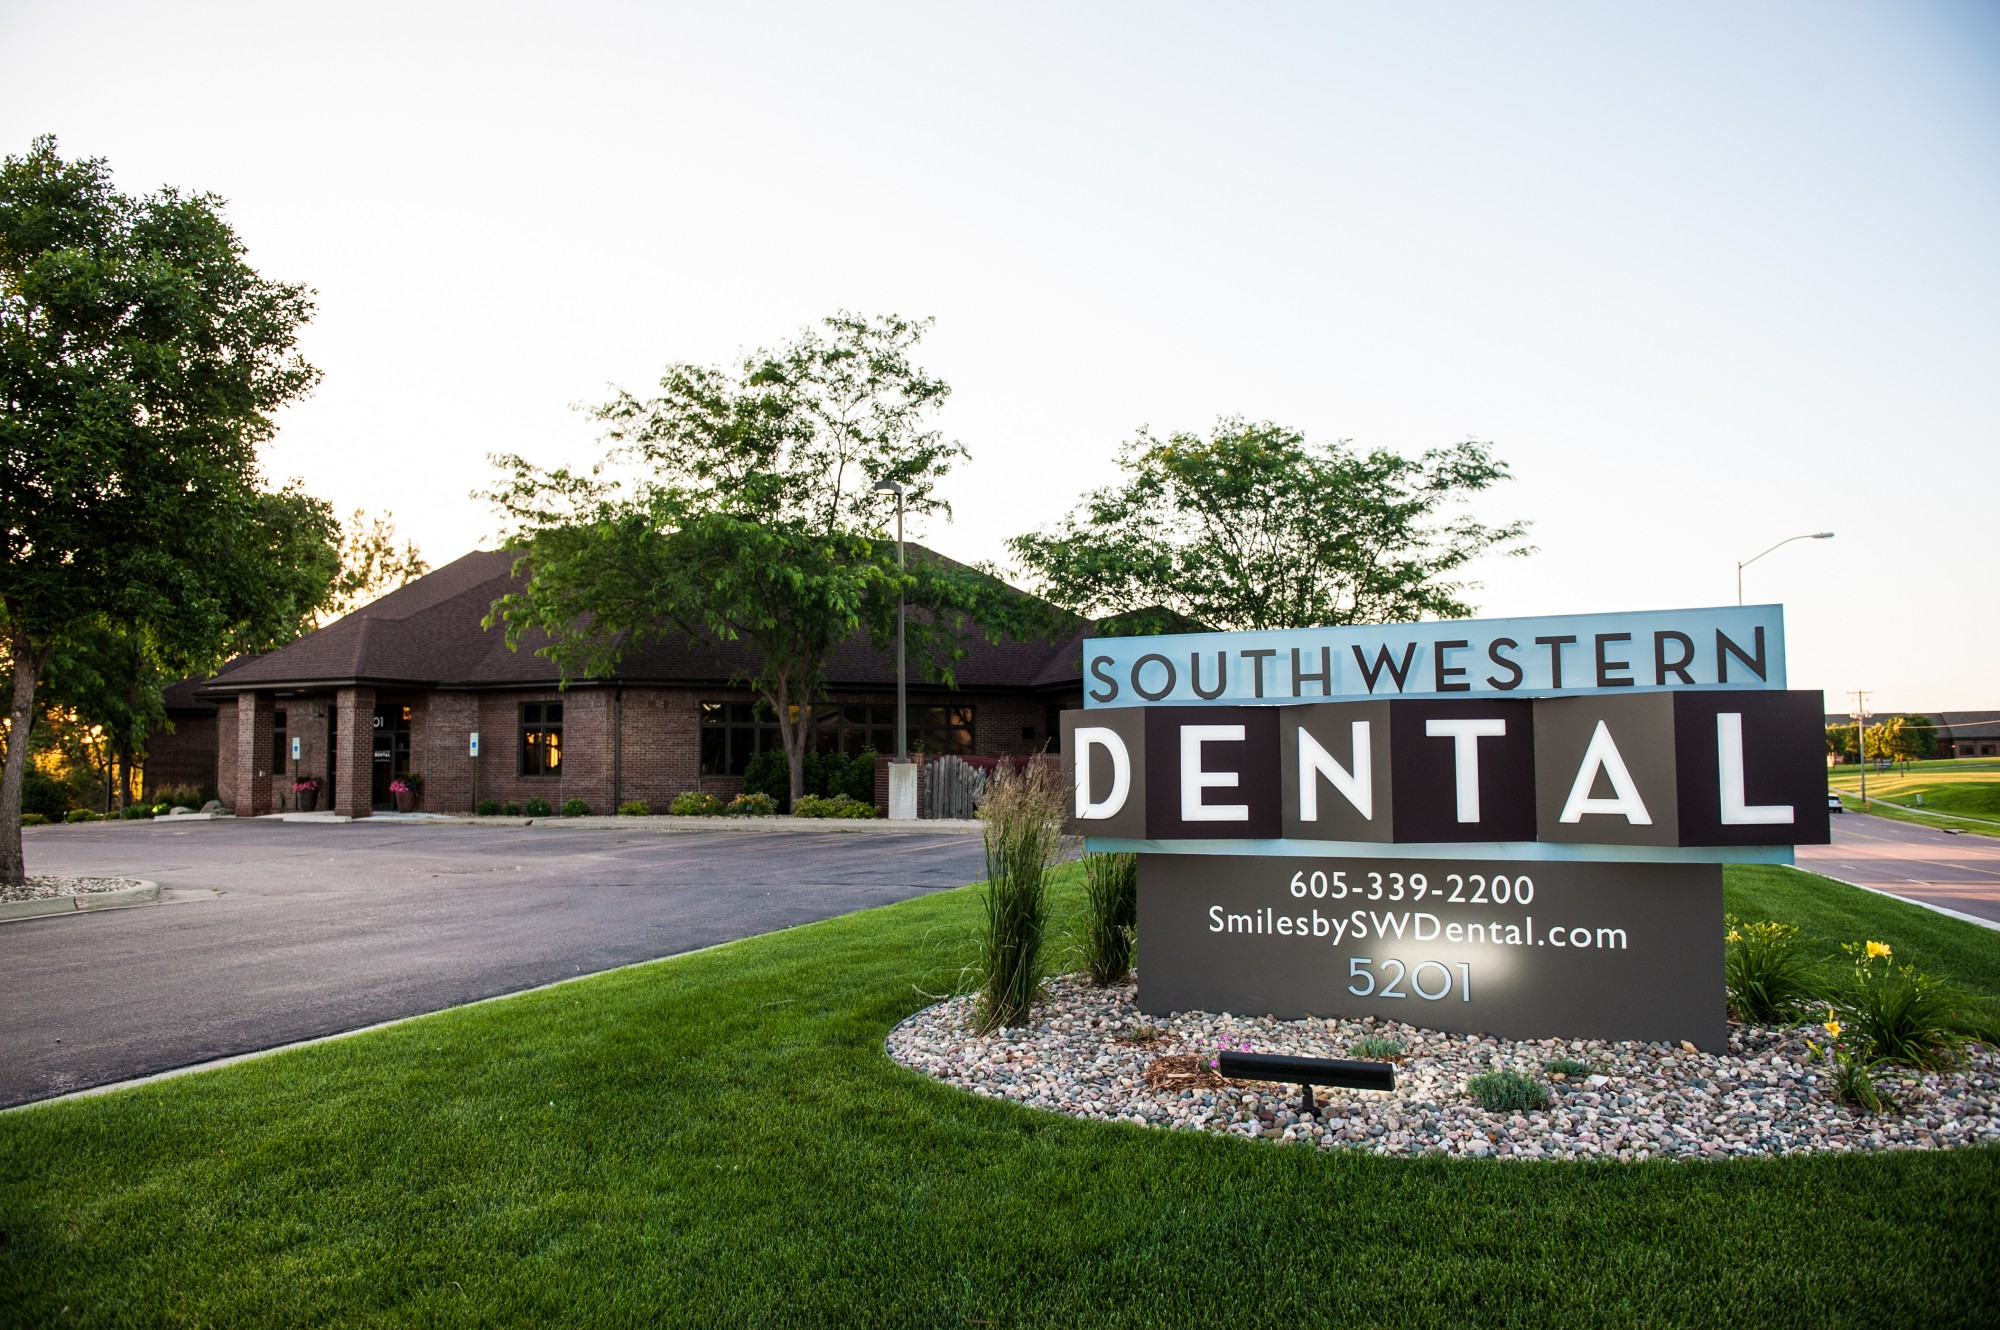 Schedule an appoointment with Southwestern Dental